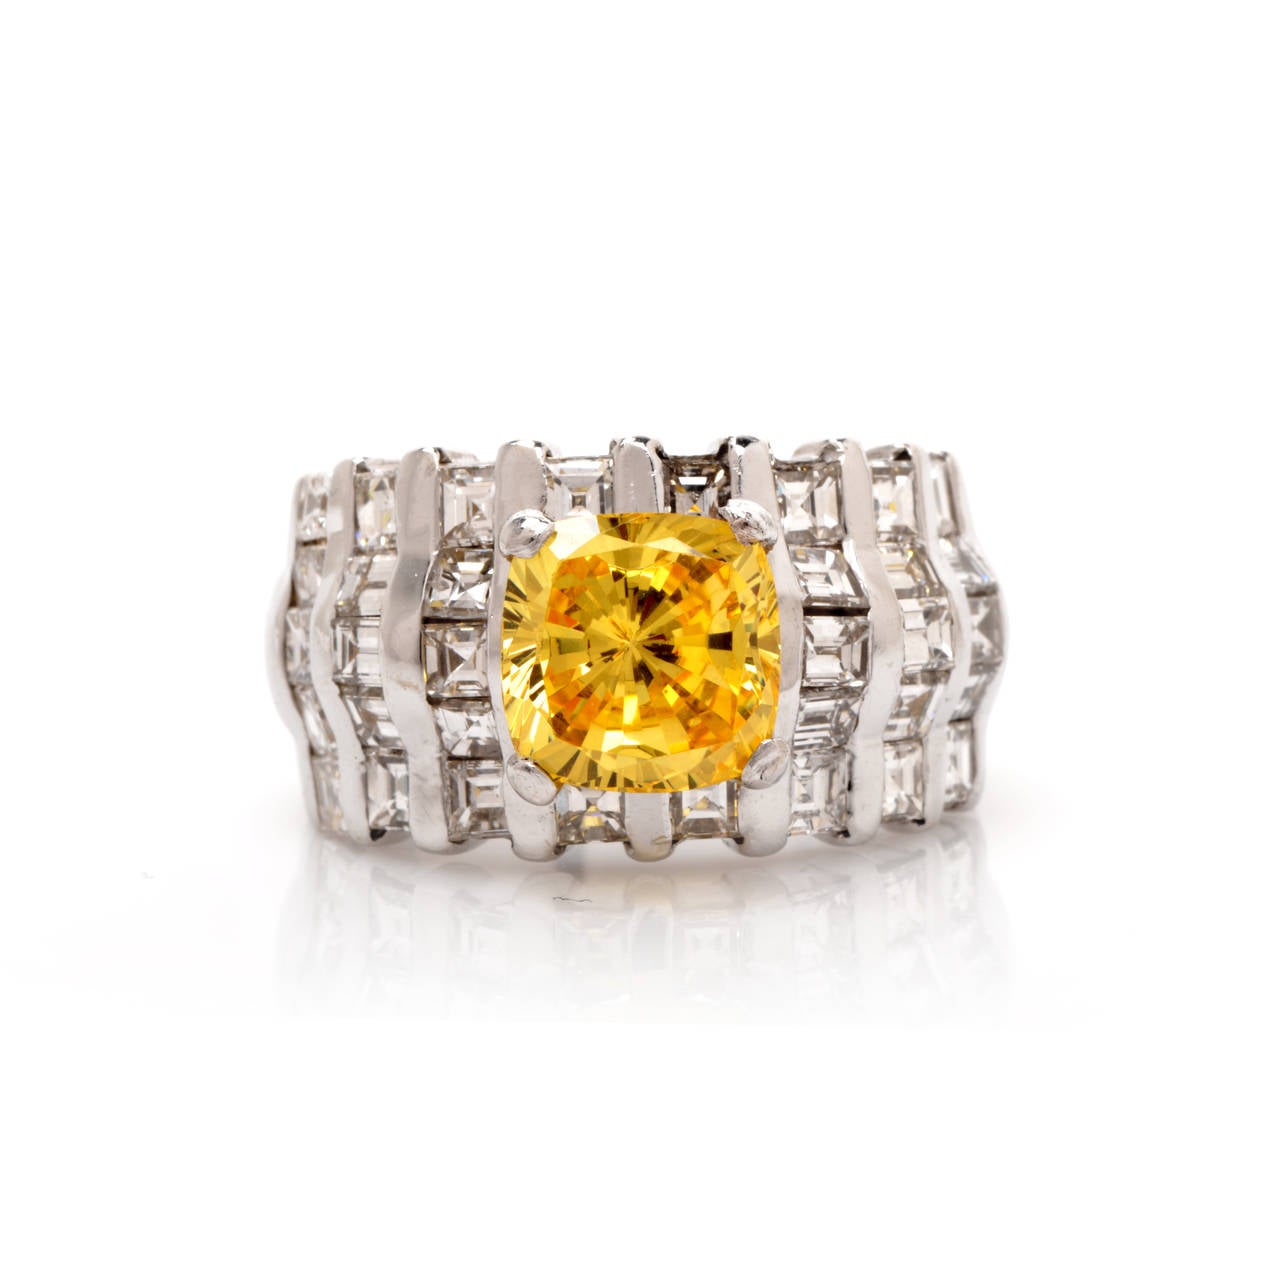 This estate ring with a cushion-cut yellow sapphire and baguette-cut diamonds is crafted in solid 18K white gold and weighs approx. 15.2 grams. Designed as a classically distinct wide band, this eye-catching estate engagement ring exposes at the